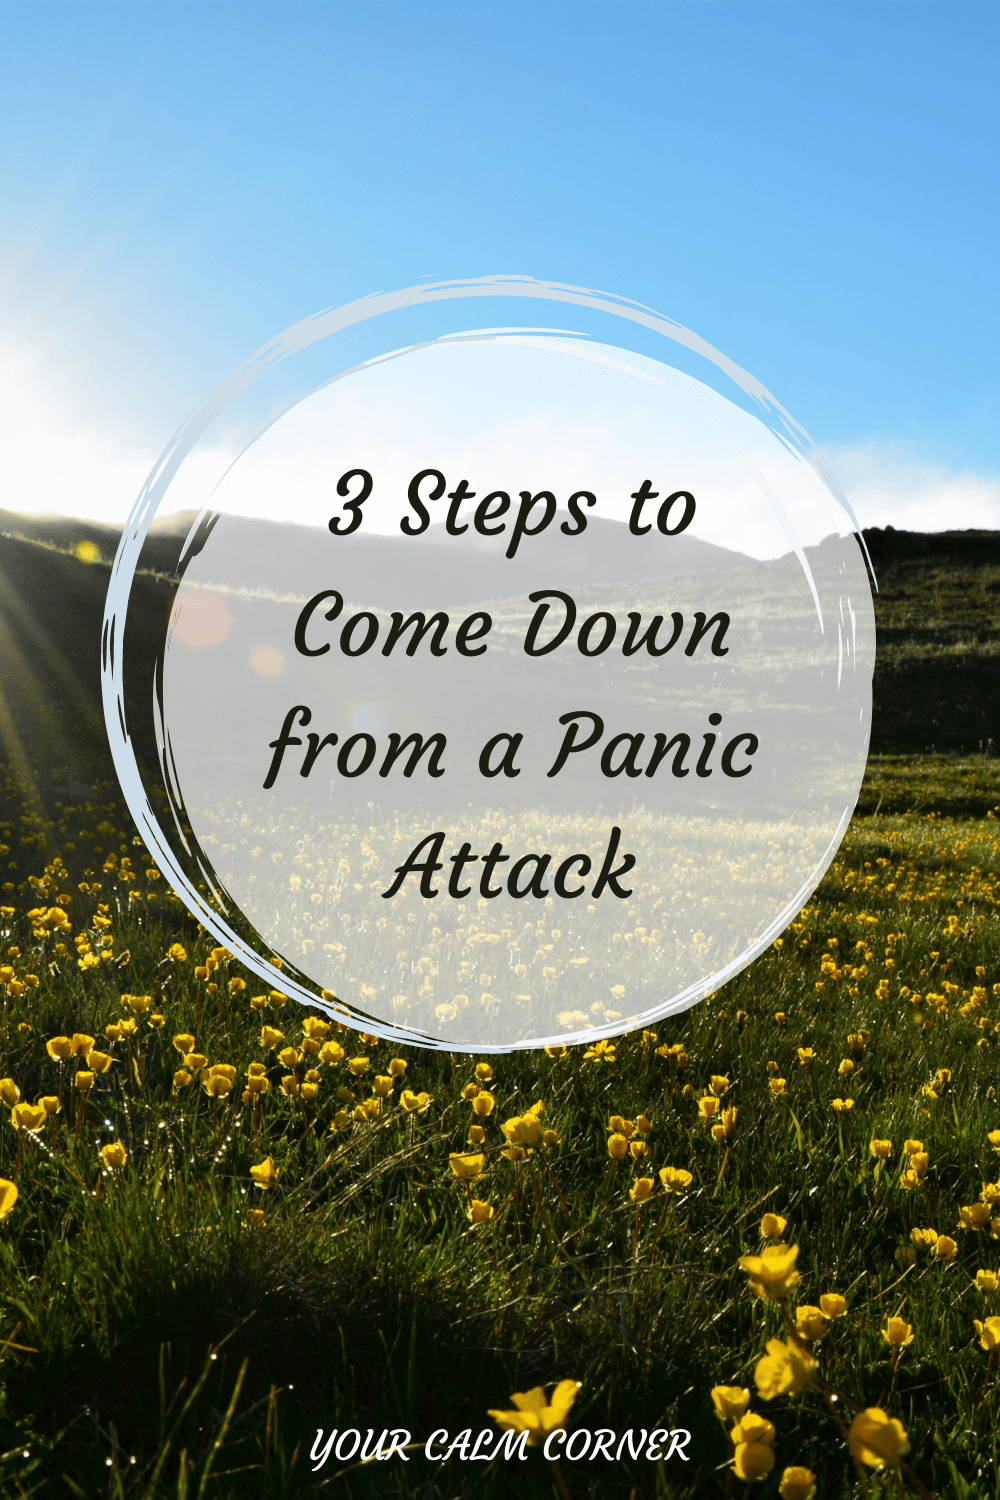 Pinterest on how to calm down from a panic attack